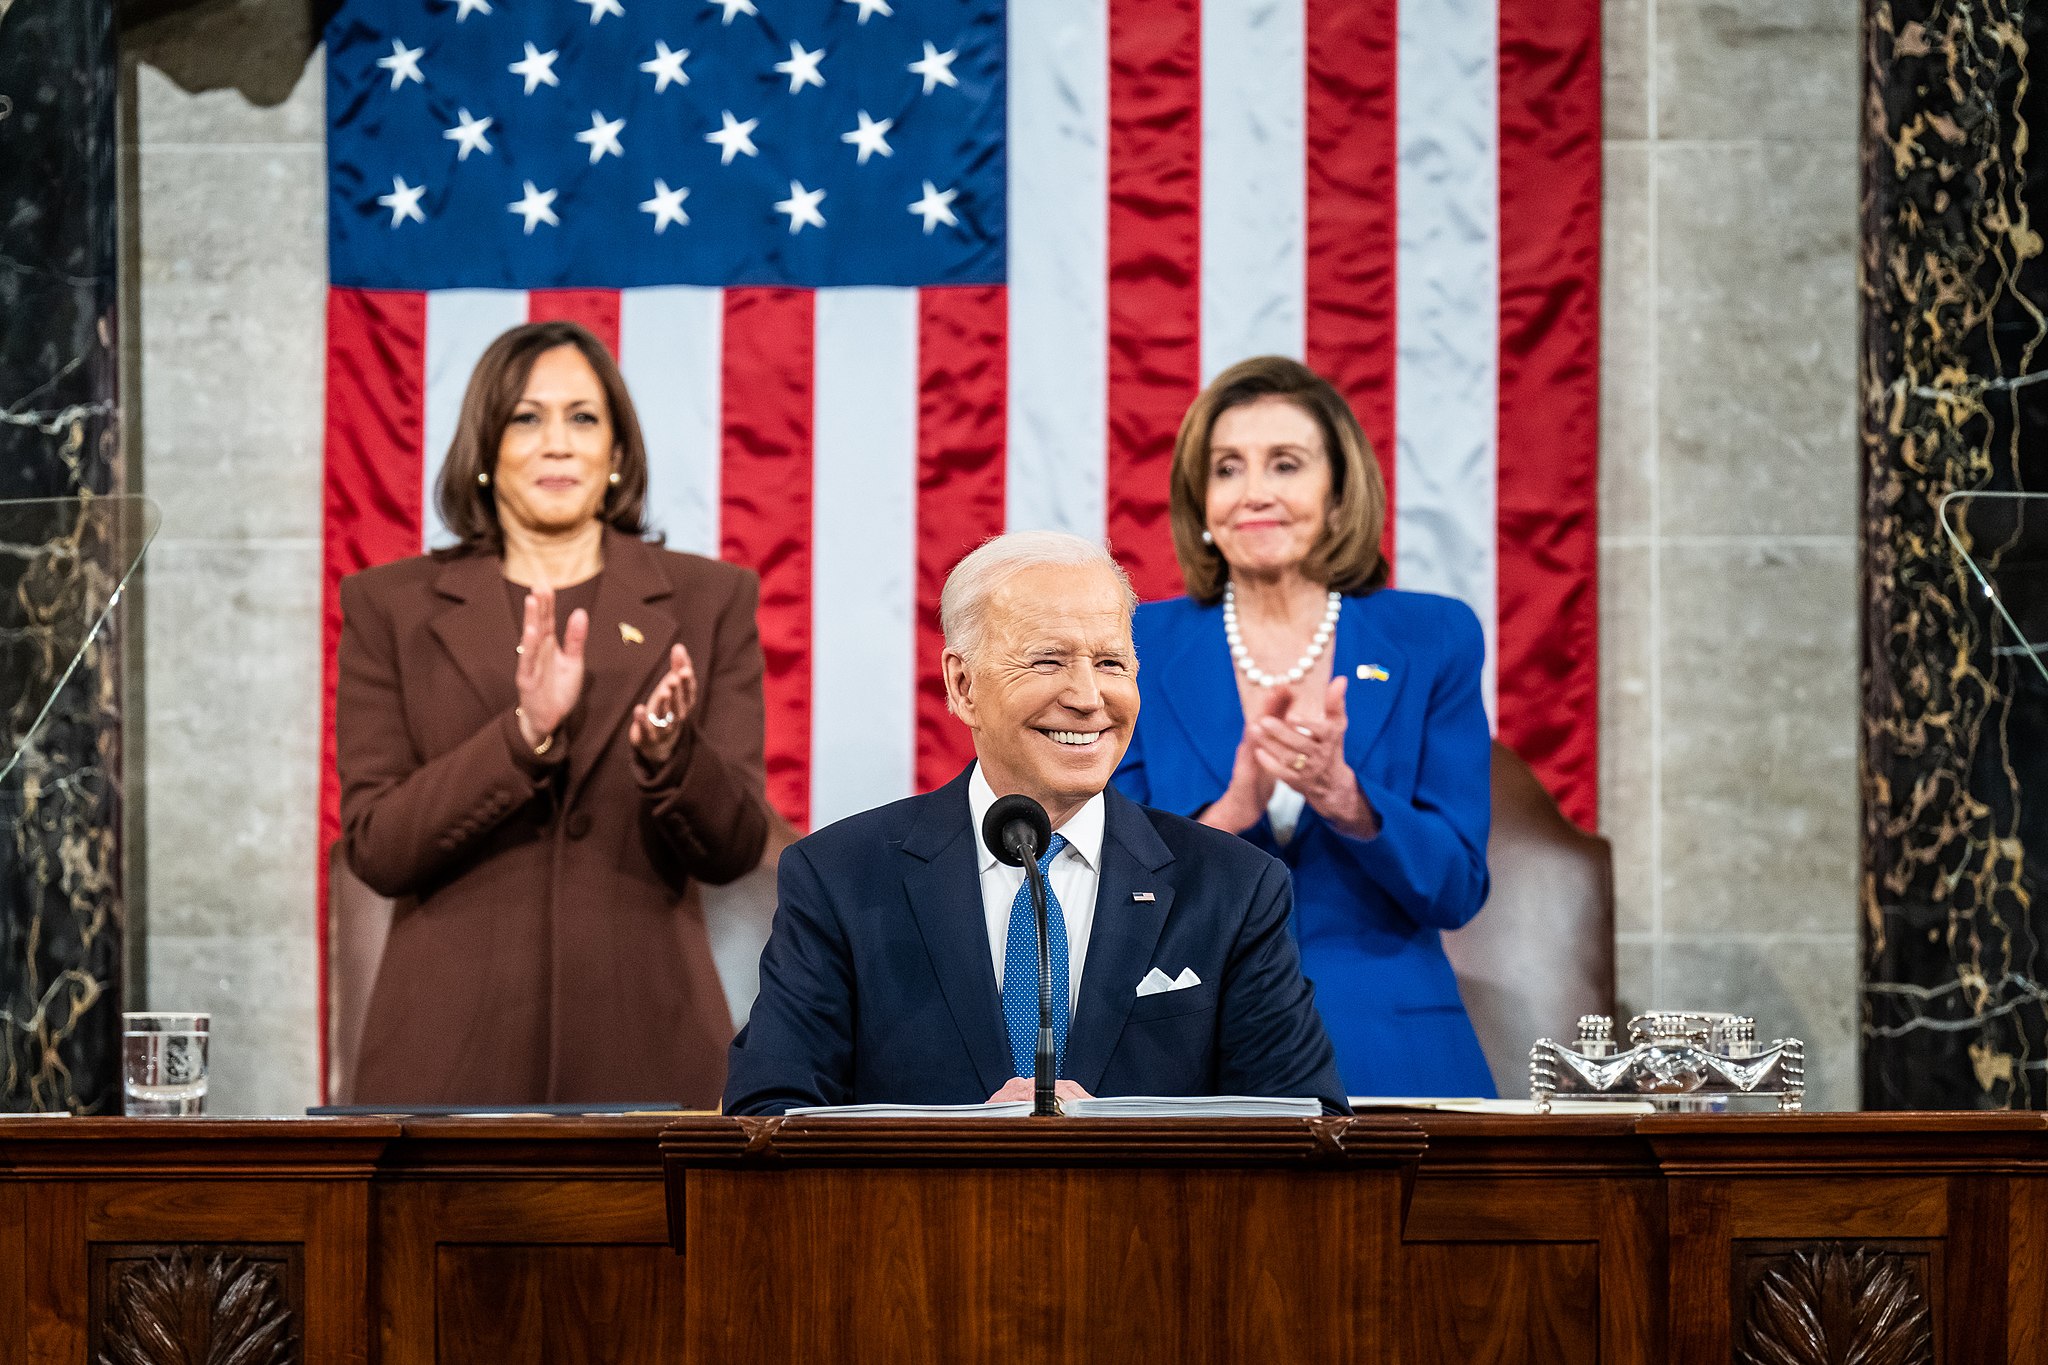 Photo of President Joe Biden delivering State of the Union address with VP Kamala Harris and Speaker Nancy Pelosi standing and applauding behind him.